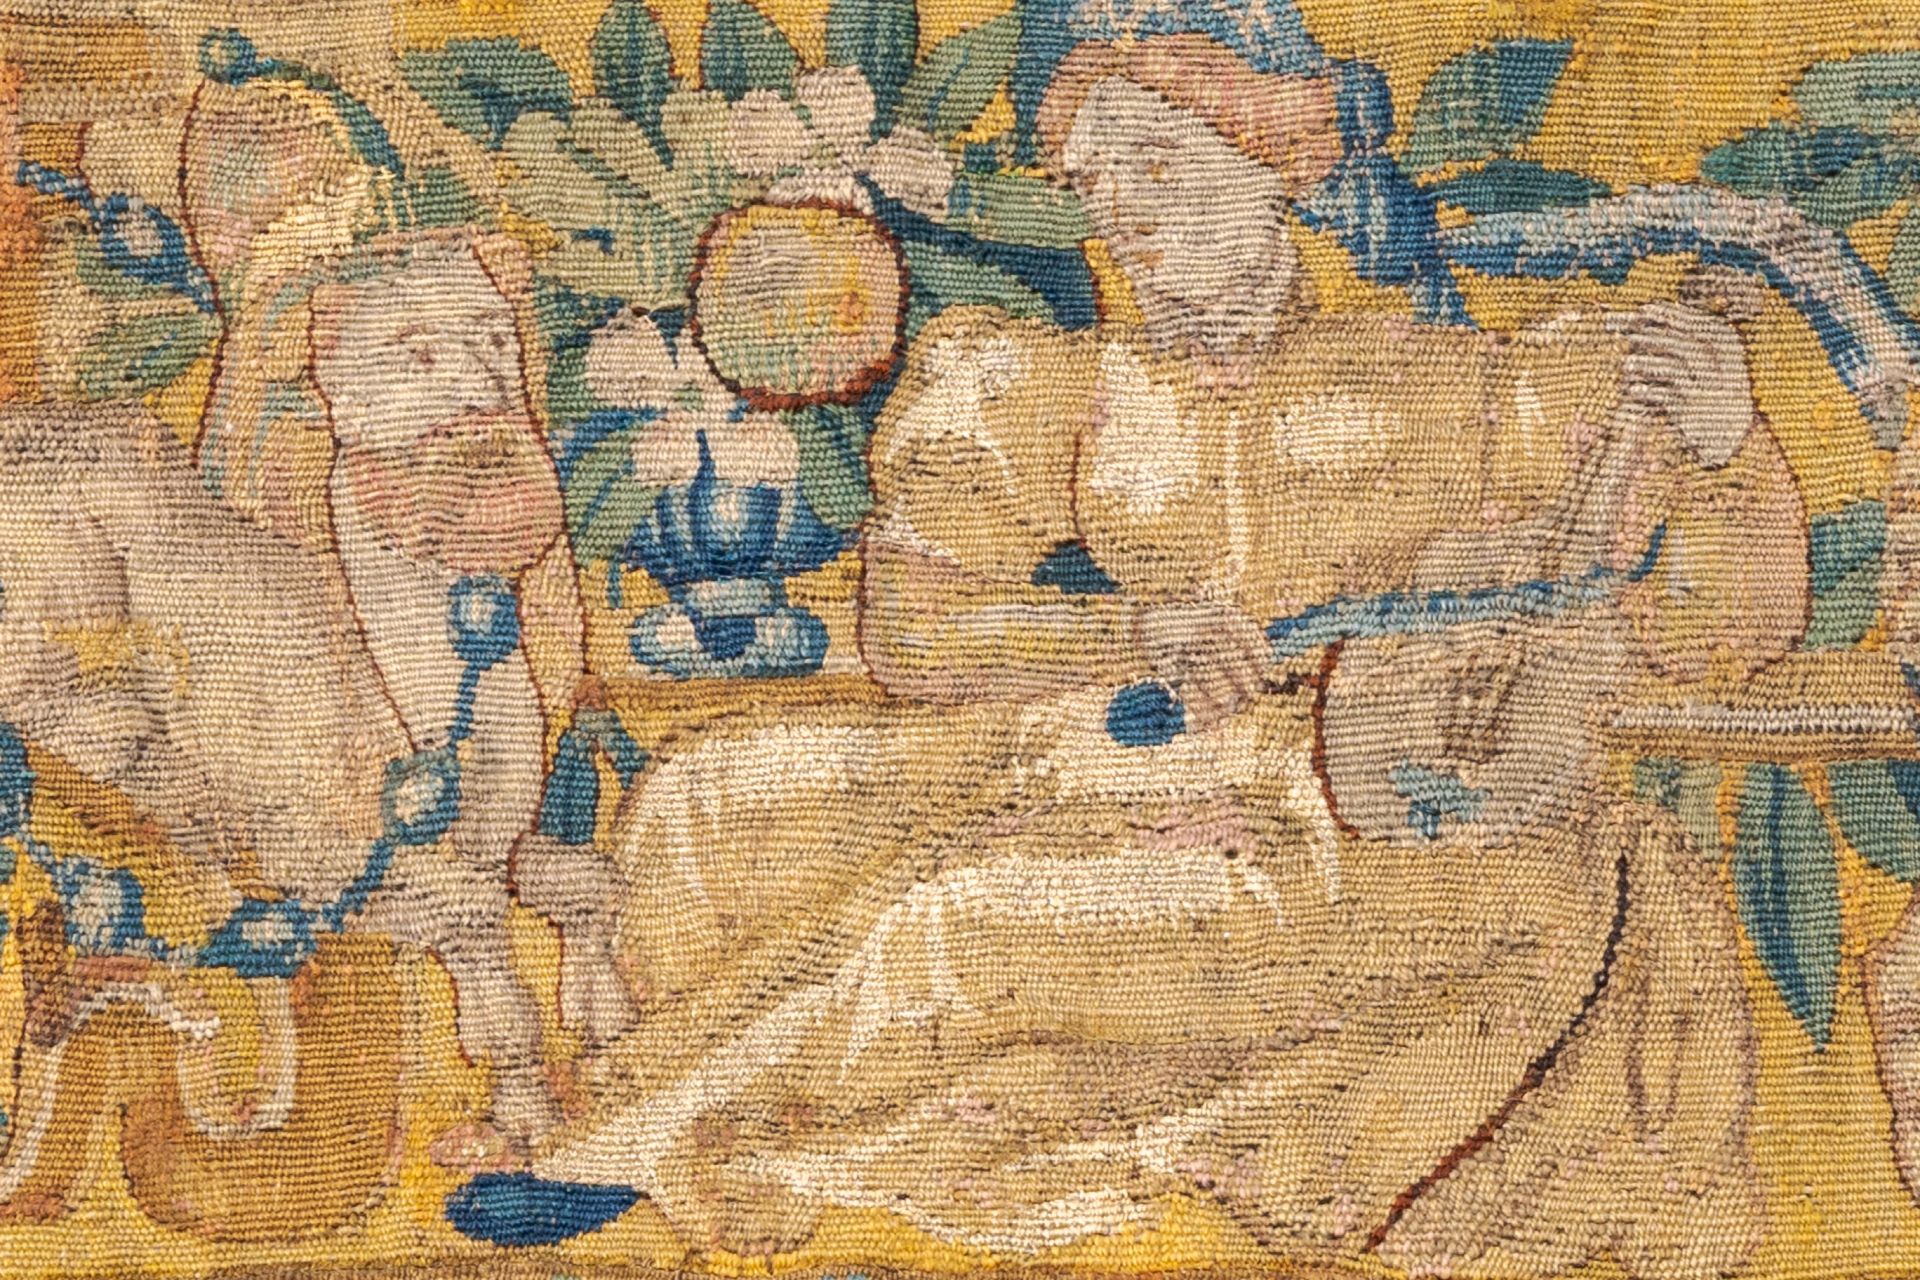 Two fragments of Flemish wall tapestries with musicians, 17th C. - Image 4 of 10